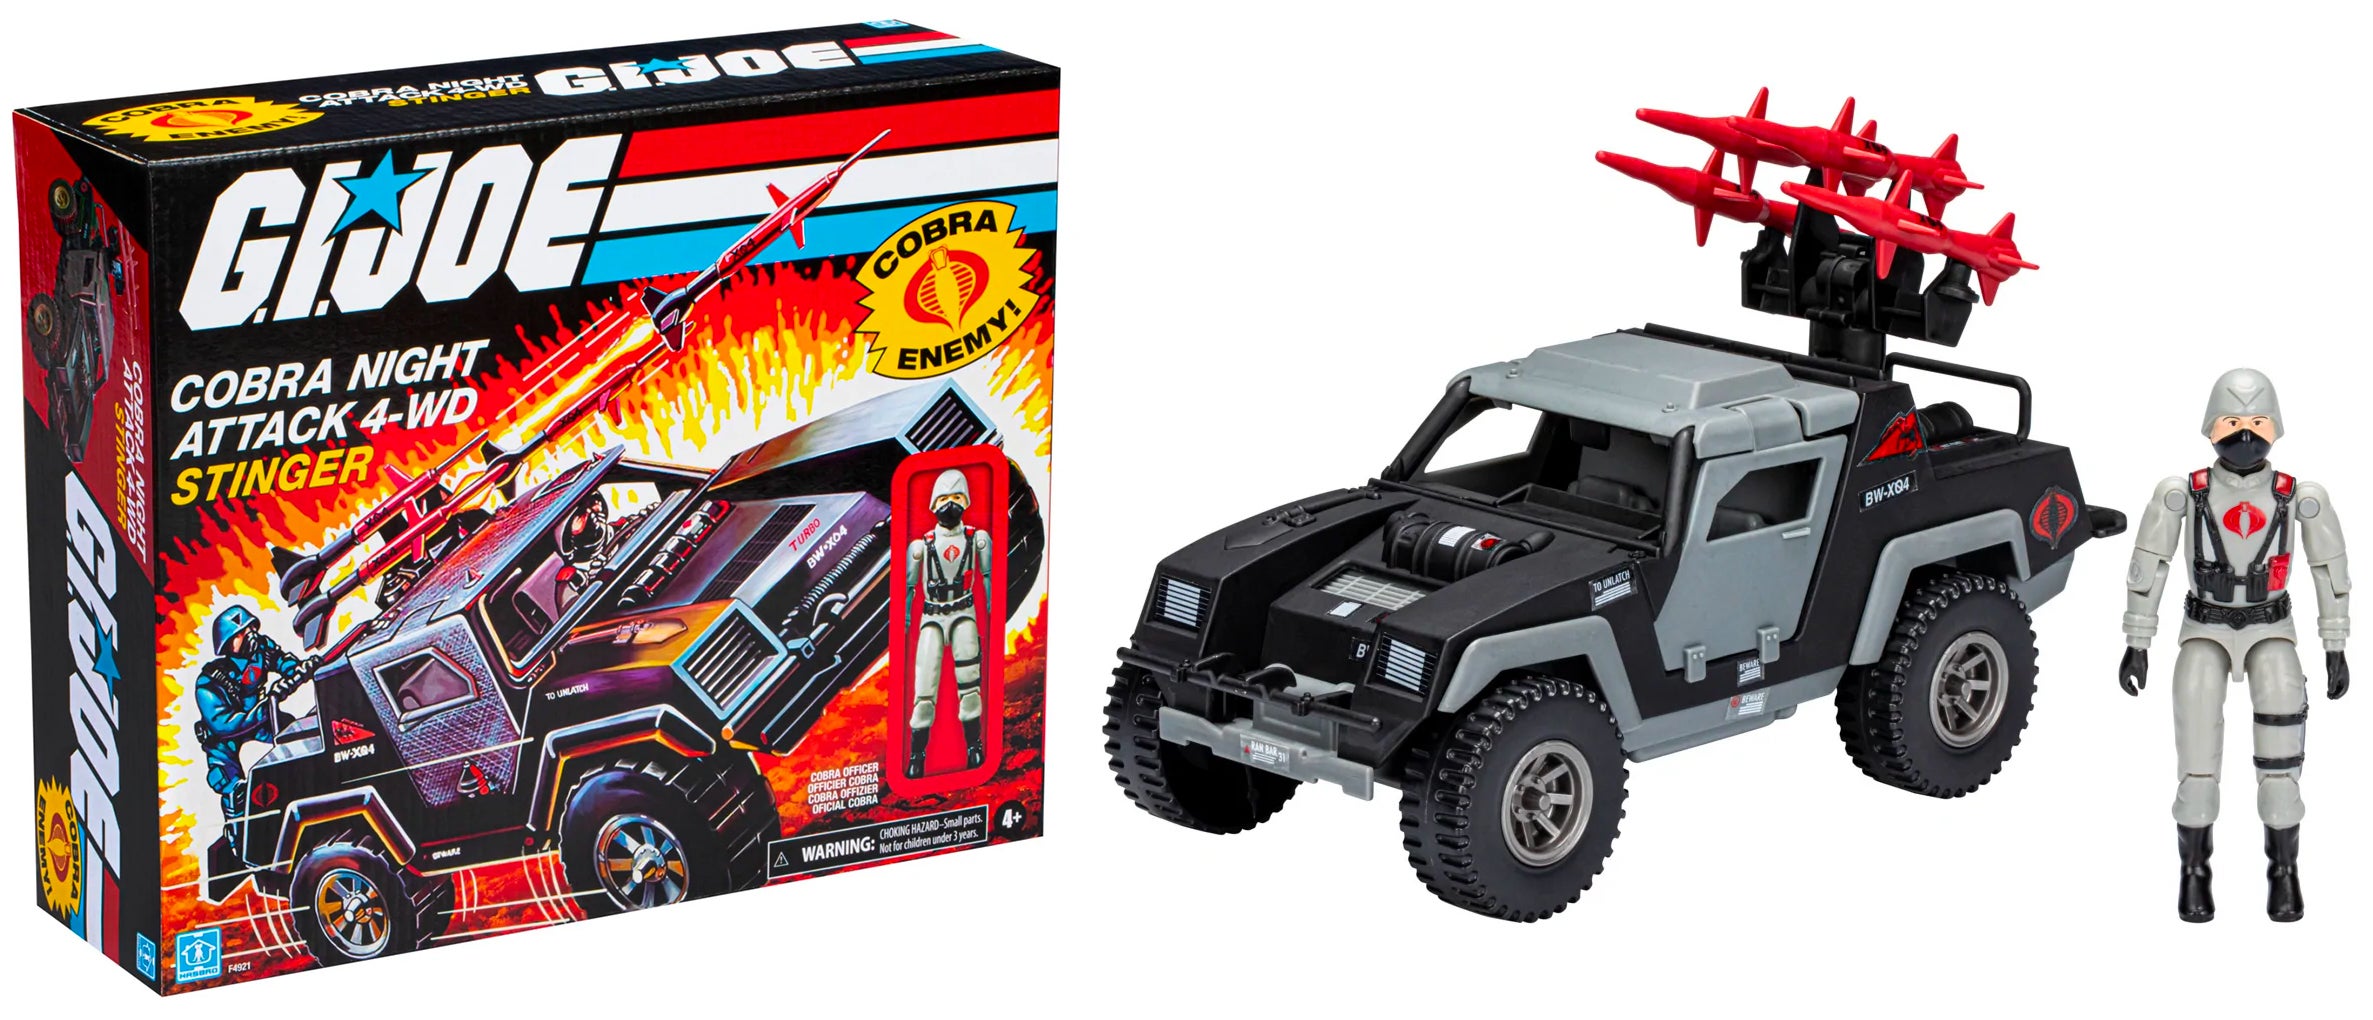 This Week’s Toy News Is Bringing the Thunder